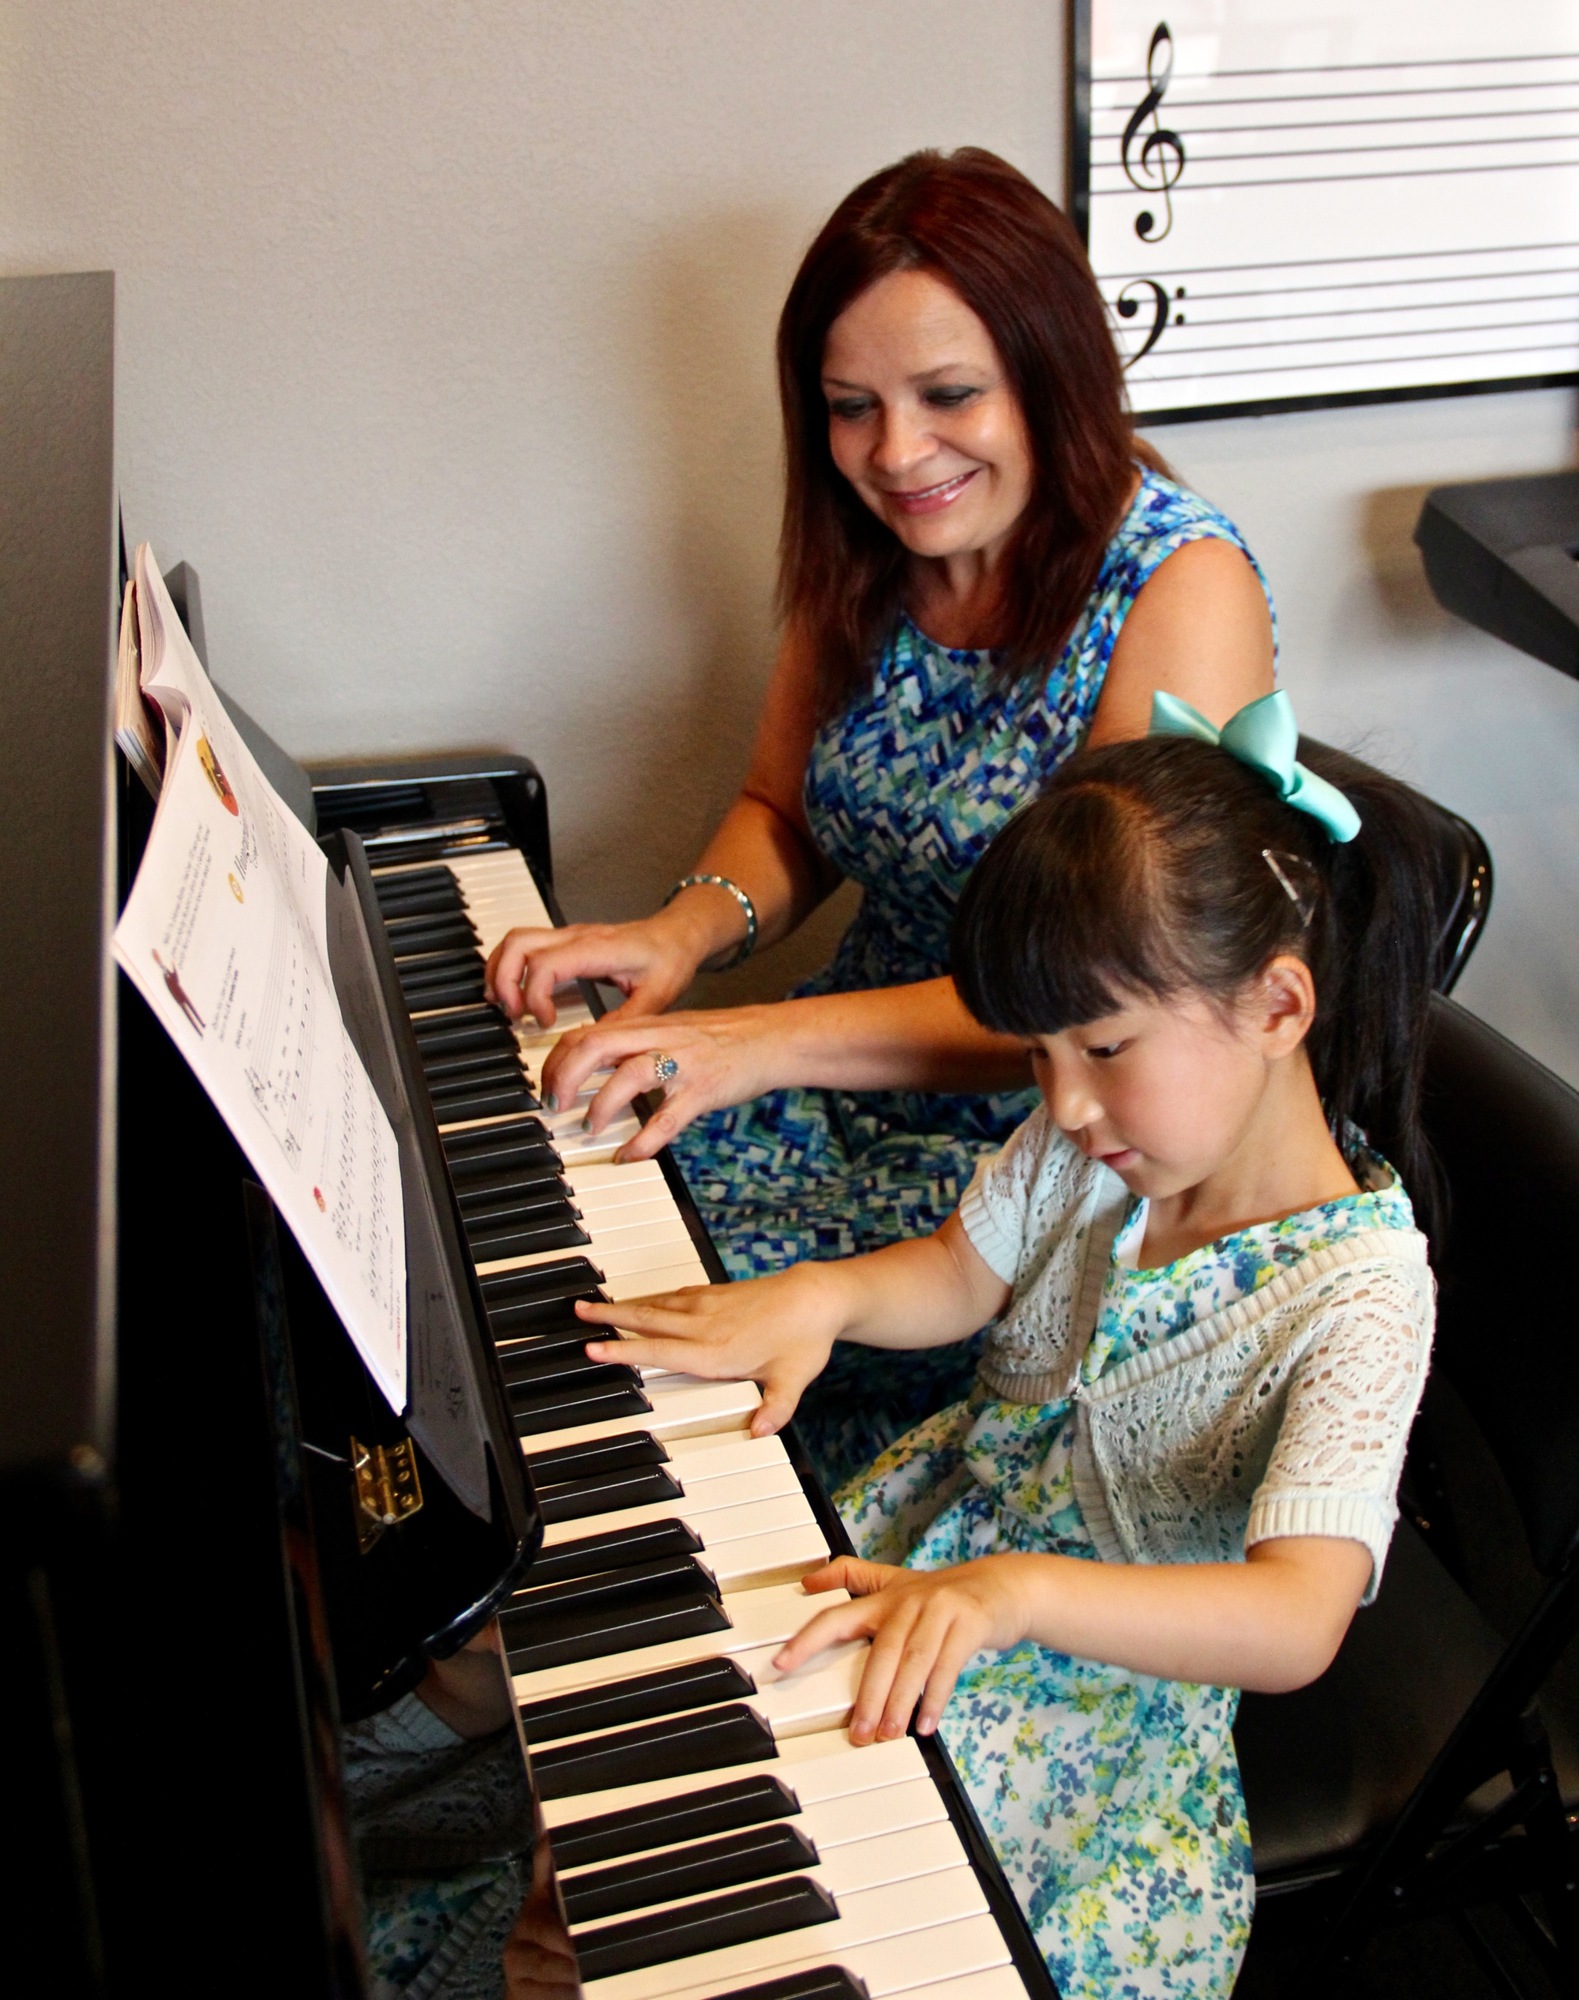 Abigail Huang and her piano teacher play a duet together during her weekly piano lessons.